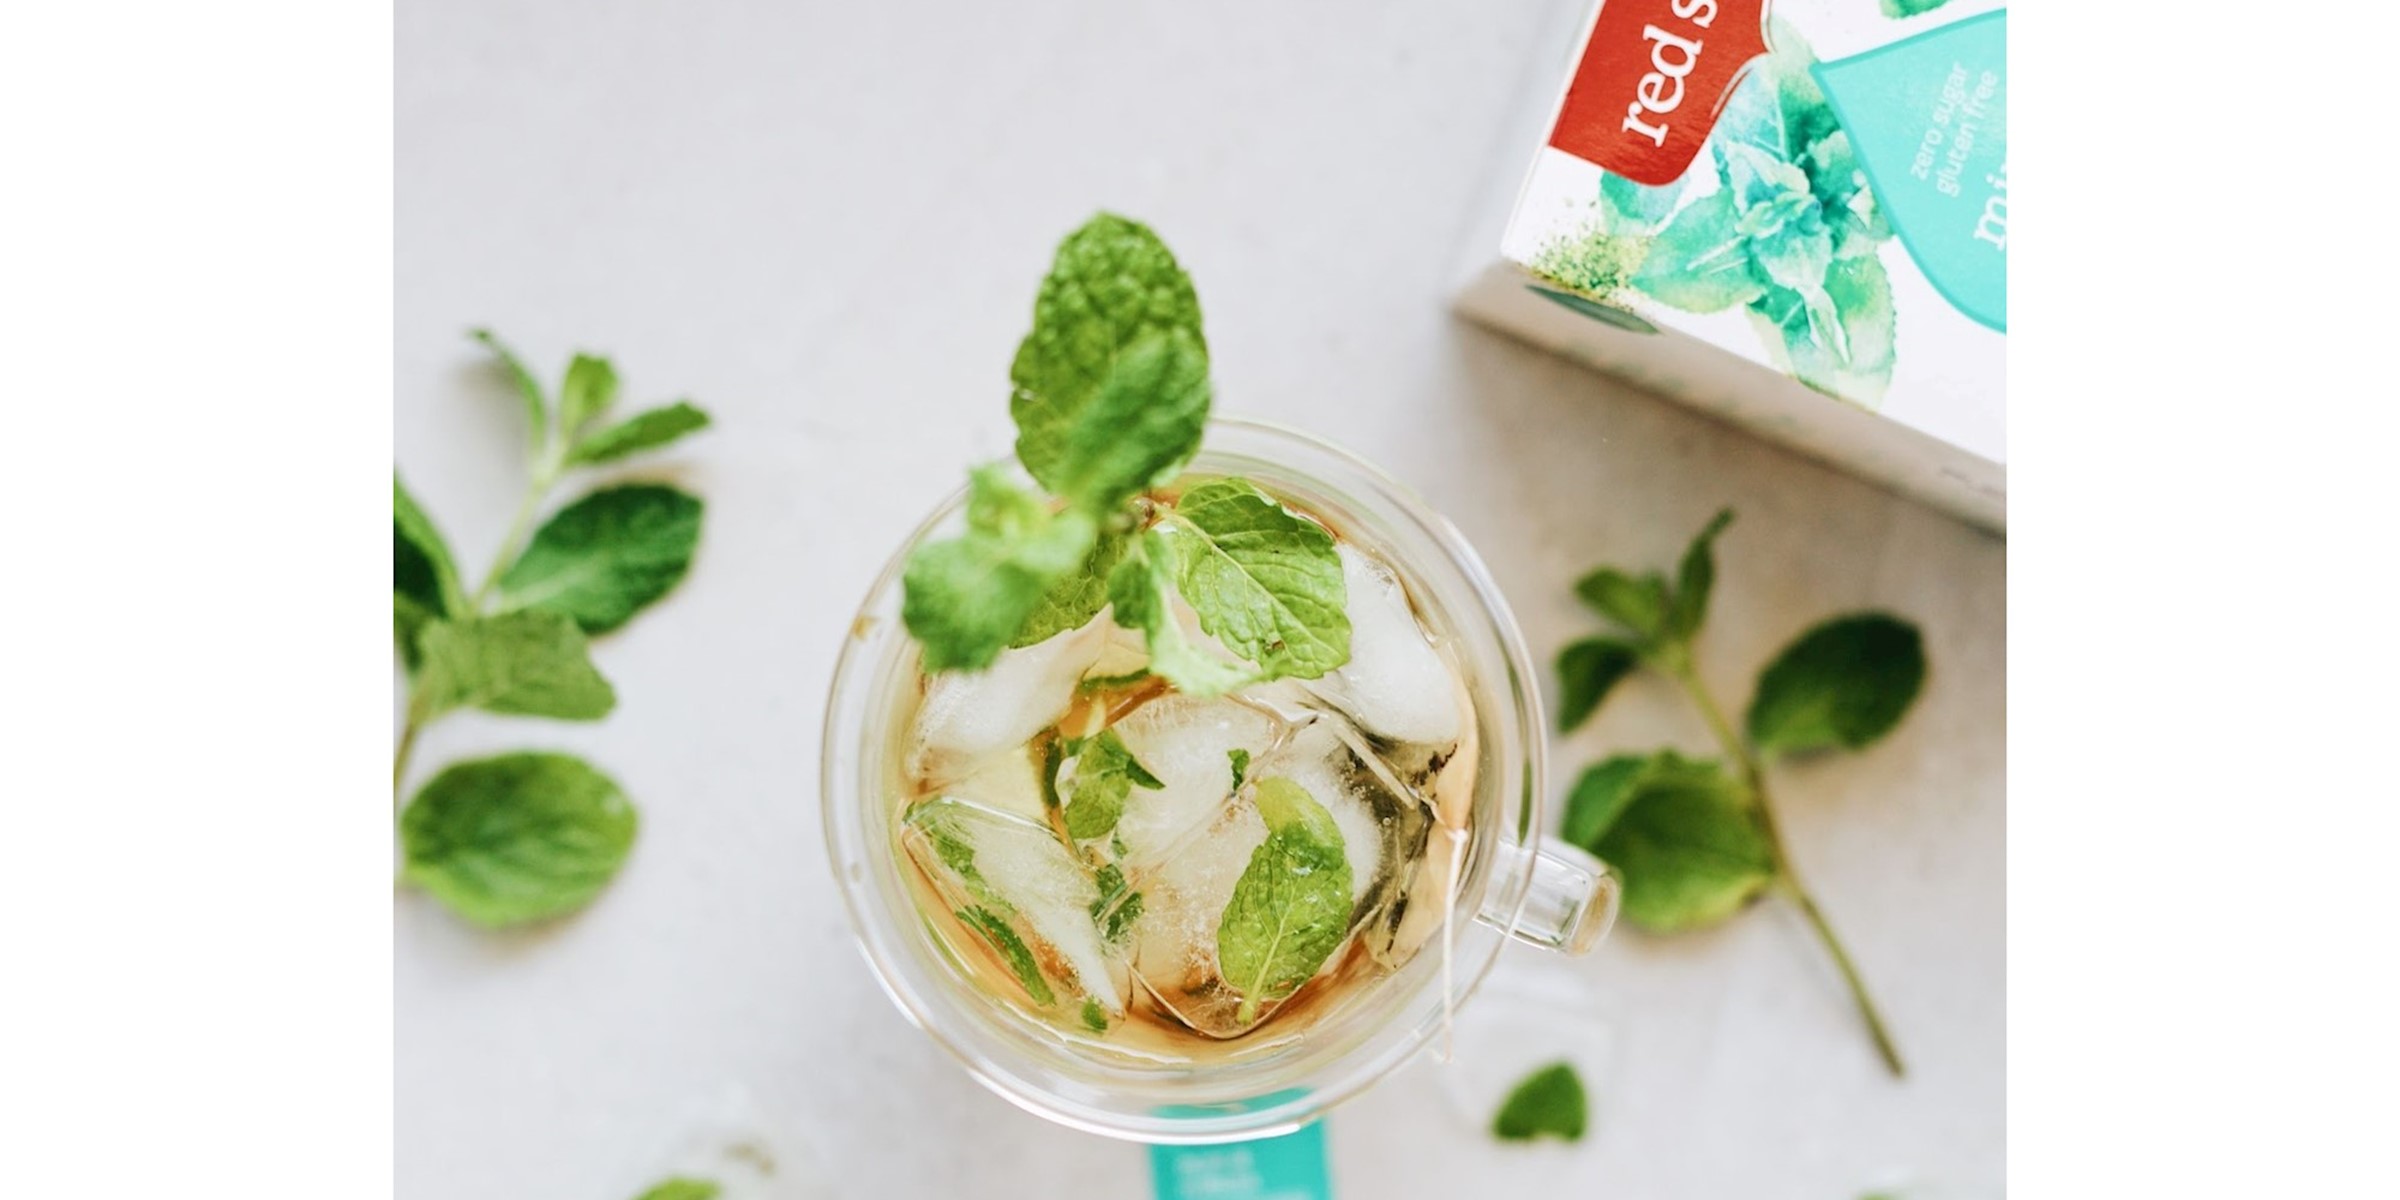 Red Seal Mint And Matcha Ice Tea 03 Square 2380X1280 80F3697